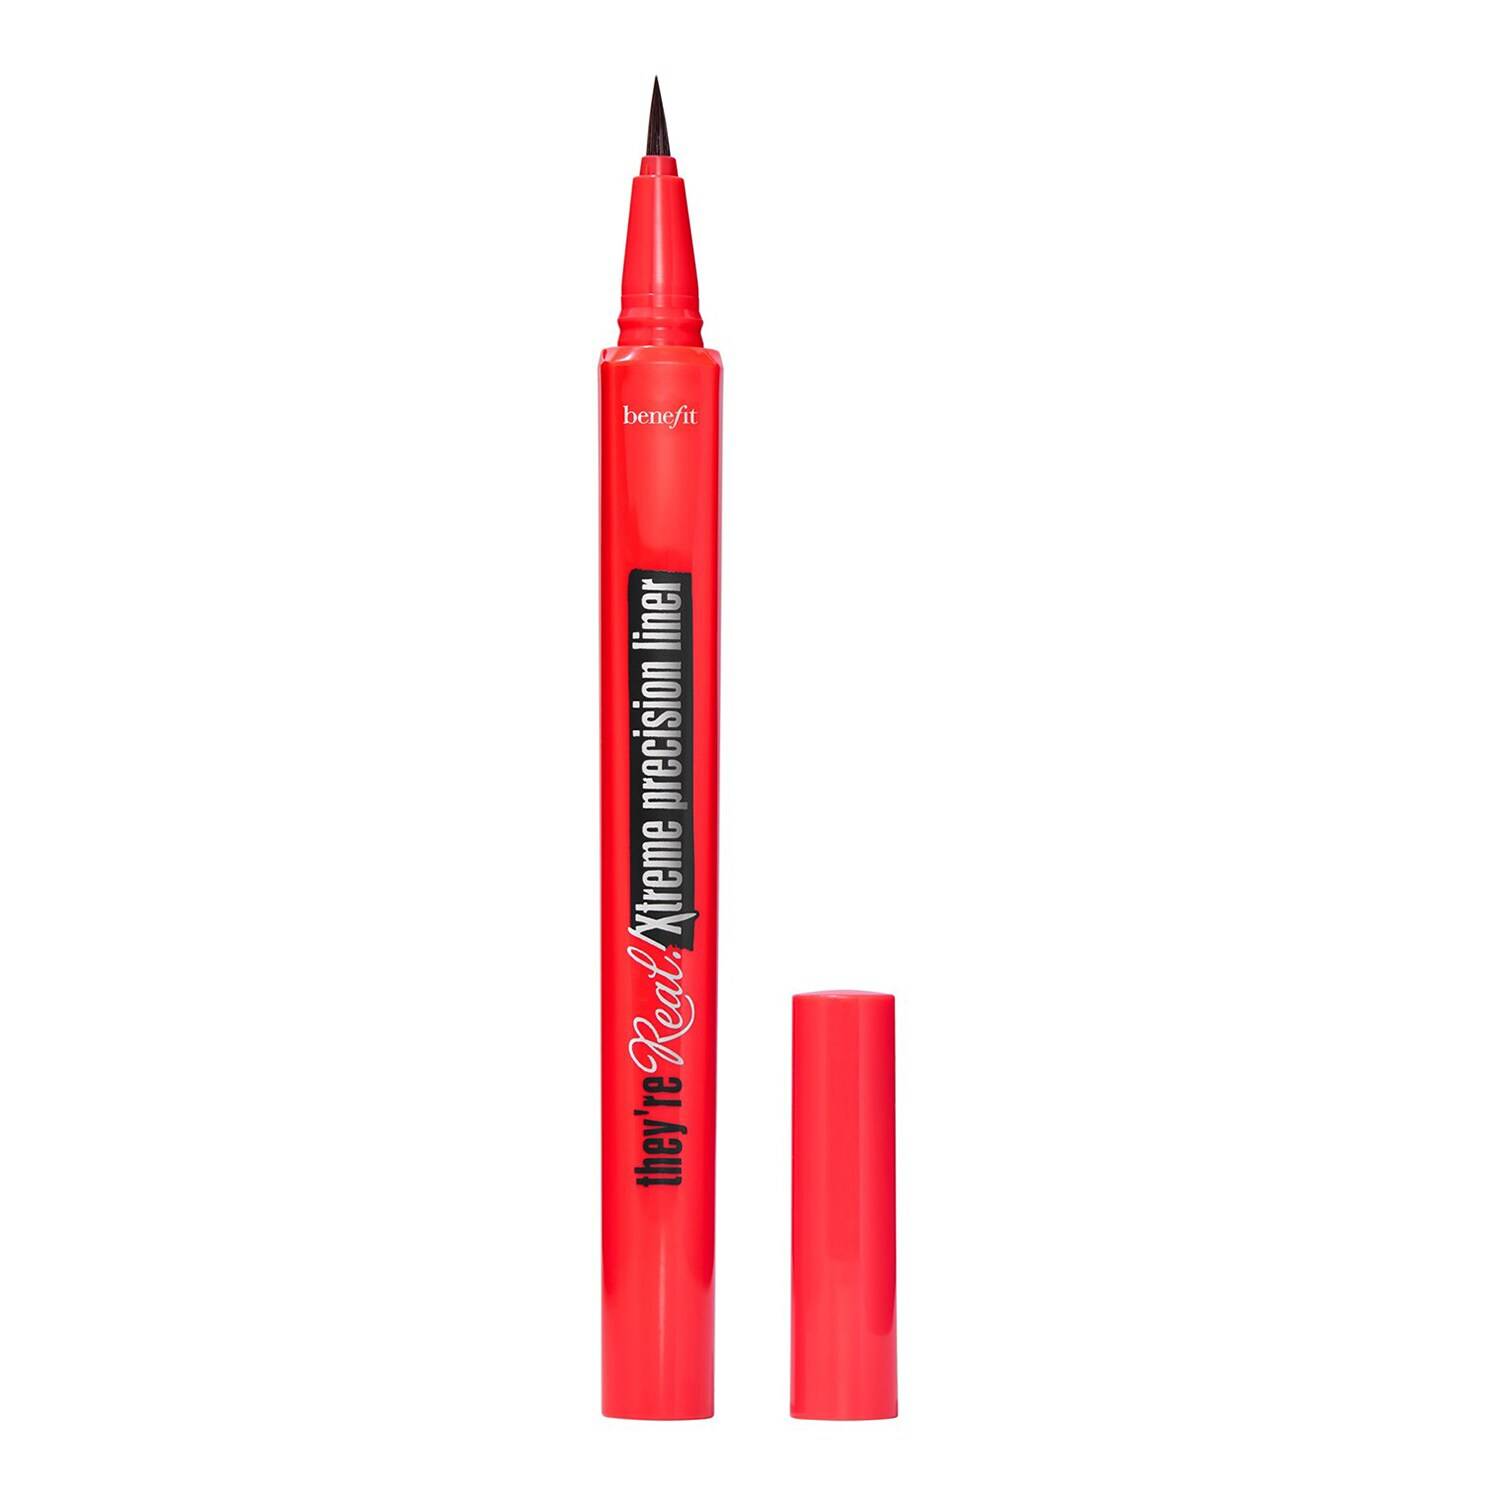 Benefit They'Re Real Xtreme Precision Waterproof Liquid Eyeliner 0.35Ml Xtra Black